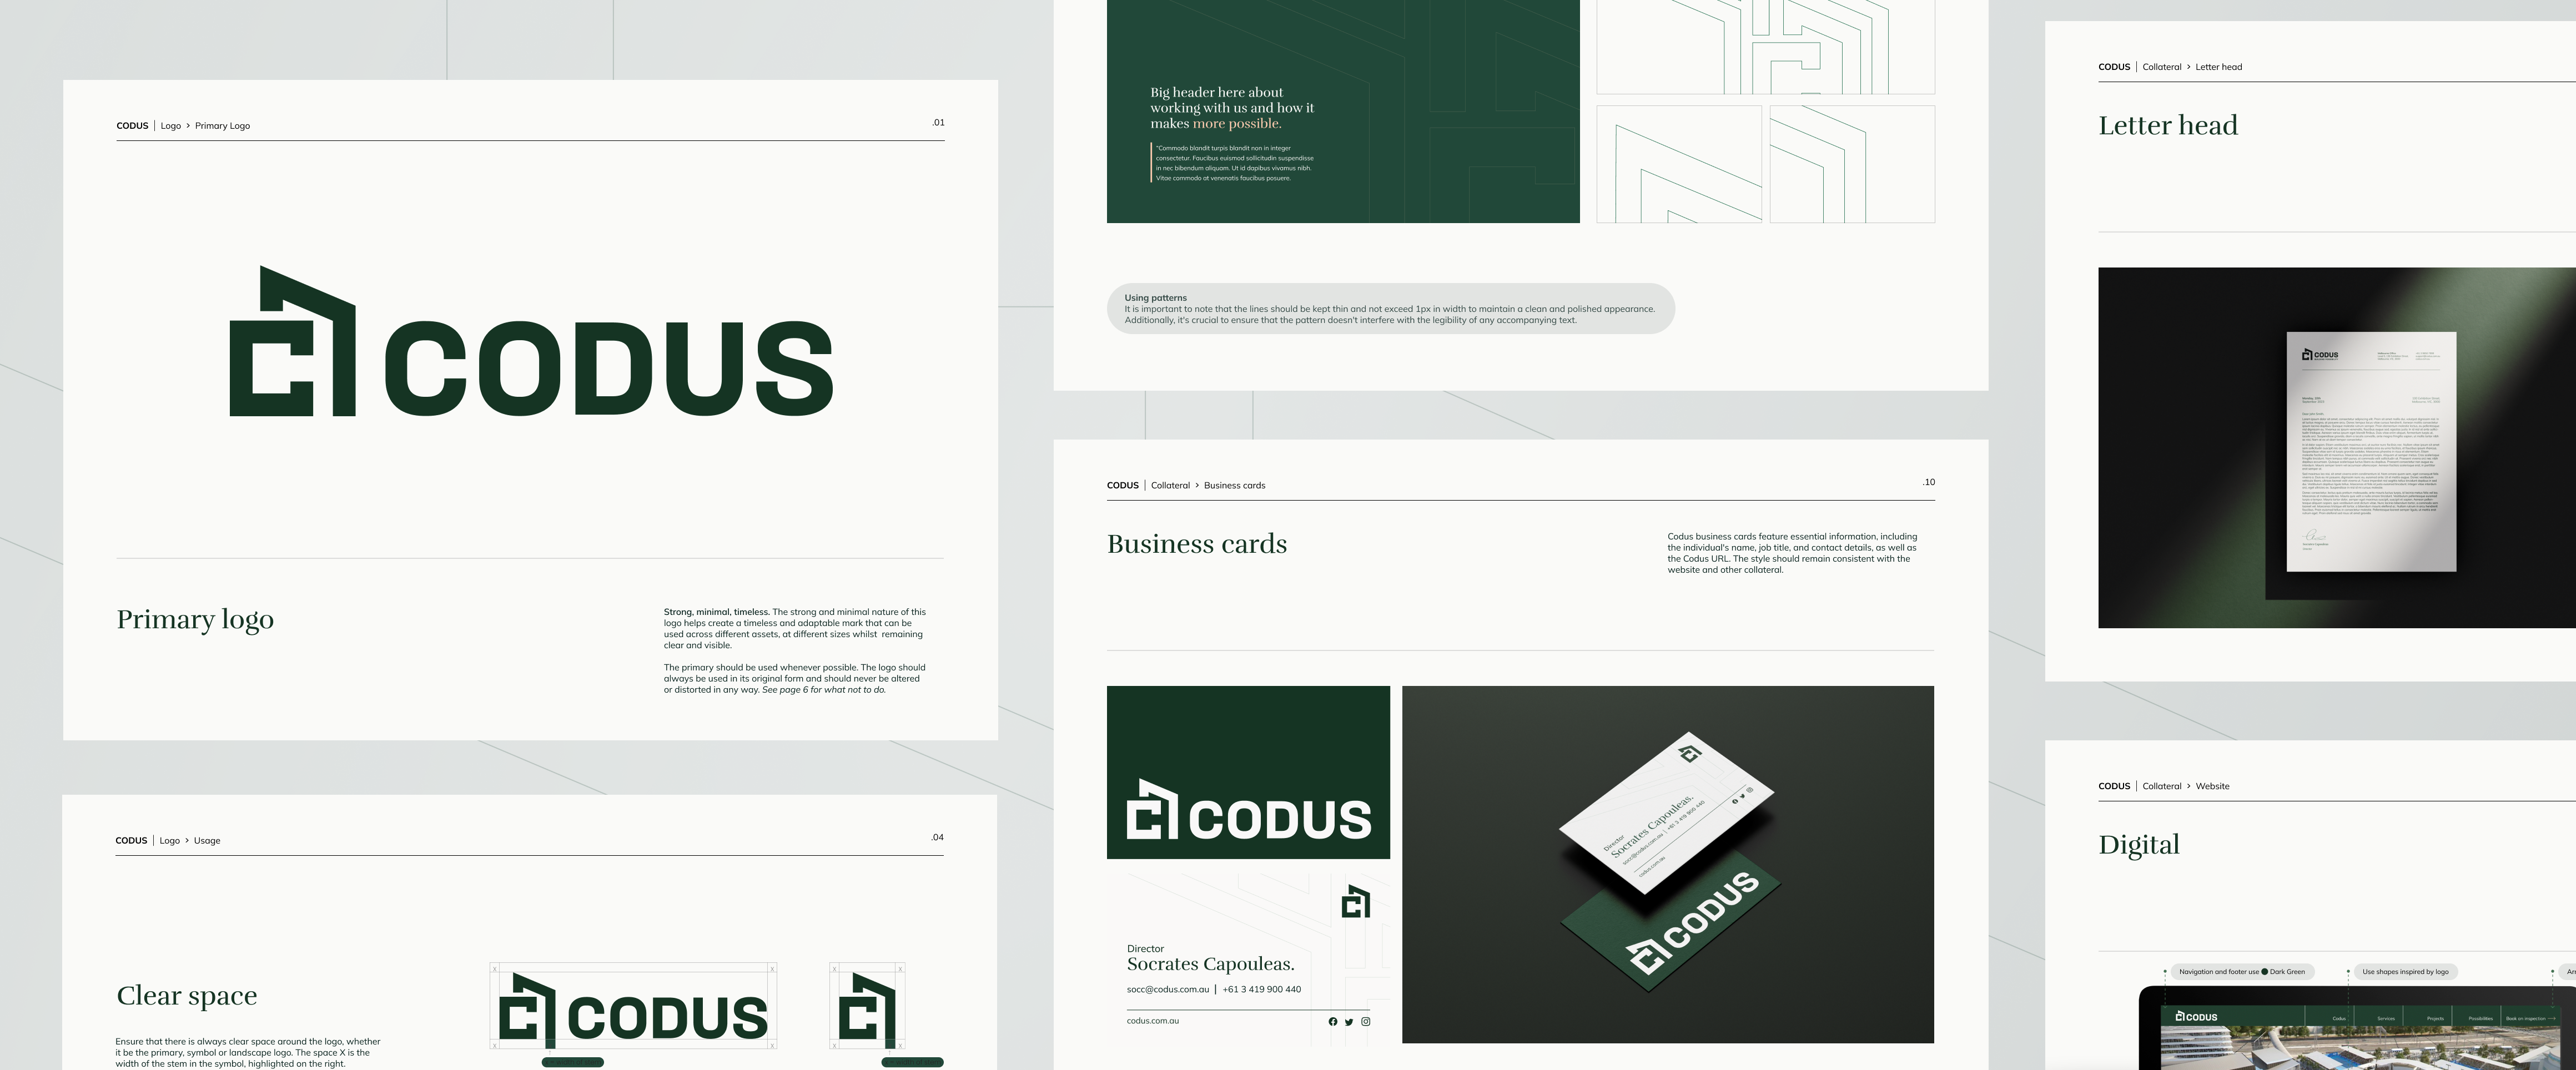 Styleguide pages for the new Codus branding